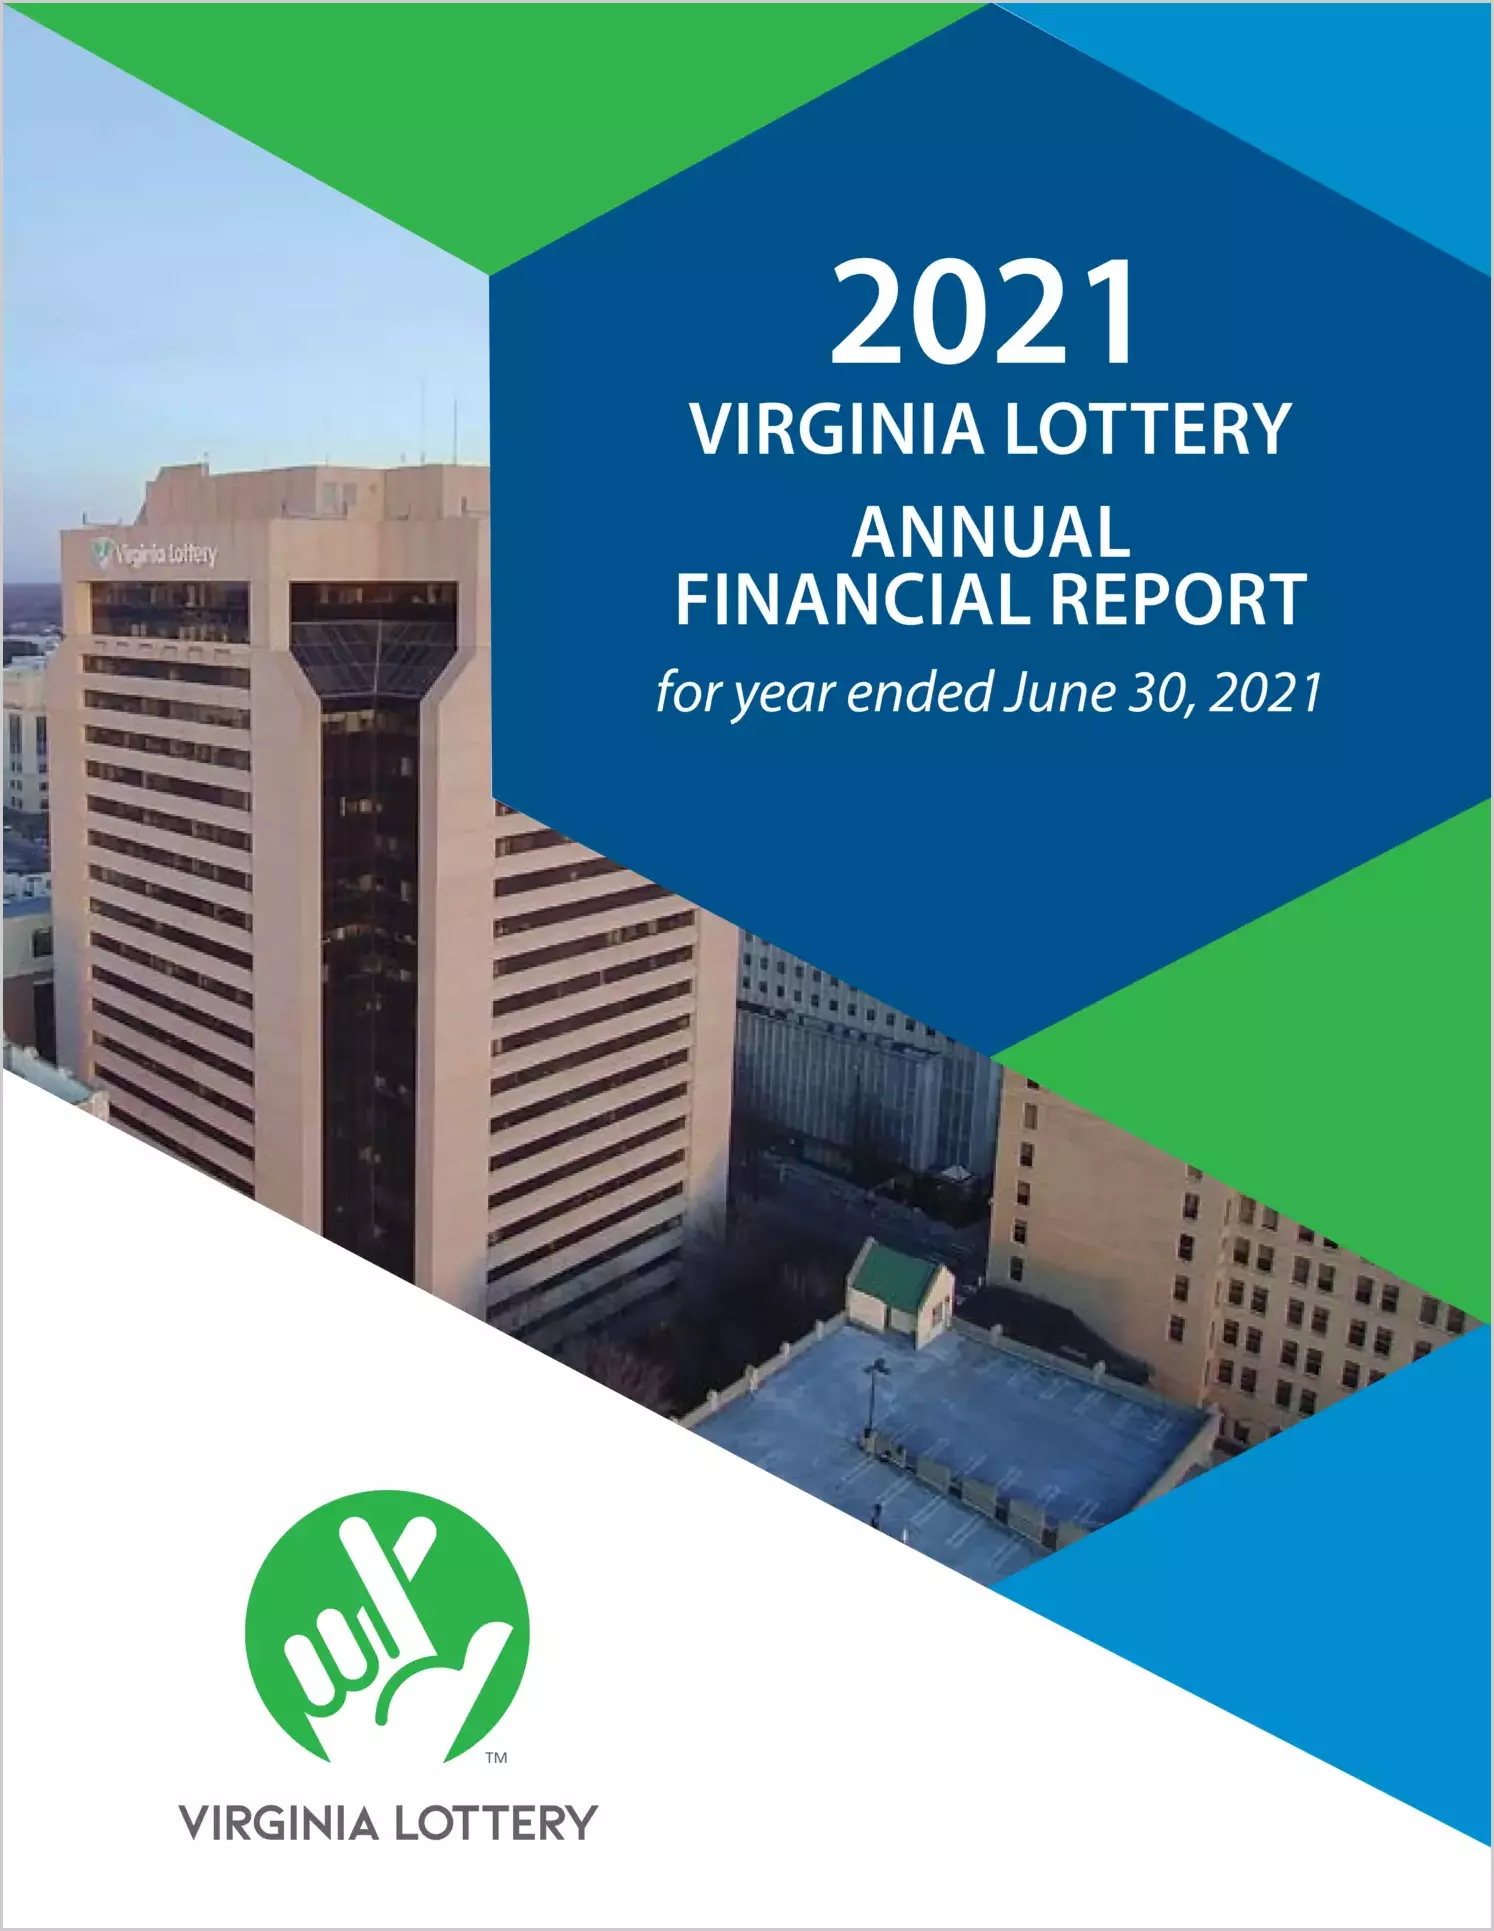 Virginia Lottery Financial Statements for the year ended June 30, 2021